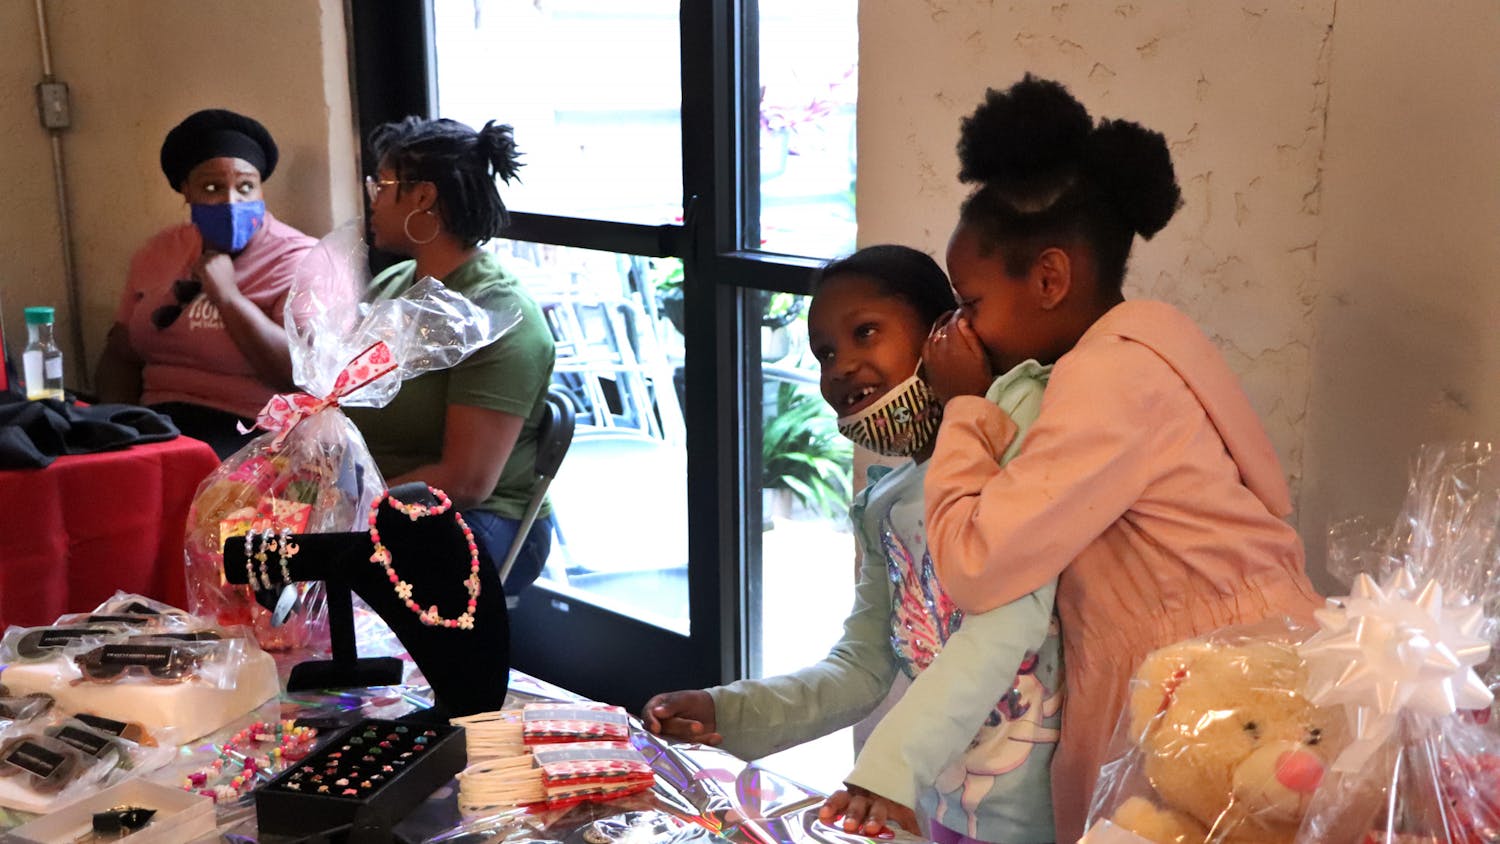 Londyn Merricks, 9, whispers in her cousin Imani Huggins', 7, ear at a Valentine's Day pop-up shop at Cypress & Grove Brewing Company on Saturday, Feb. 5. The pair was helping their mothers sell accessories.